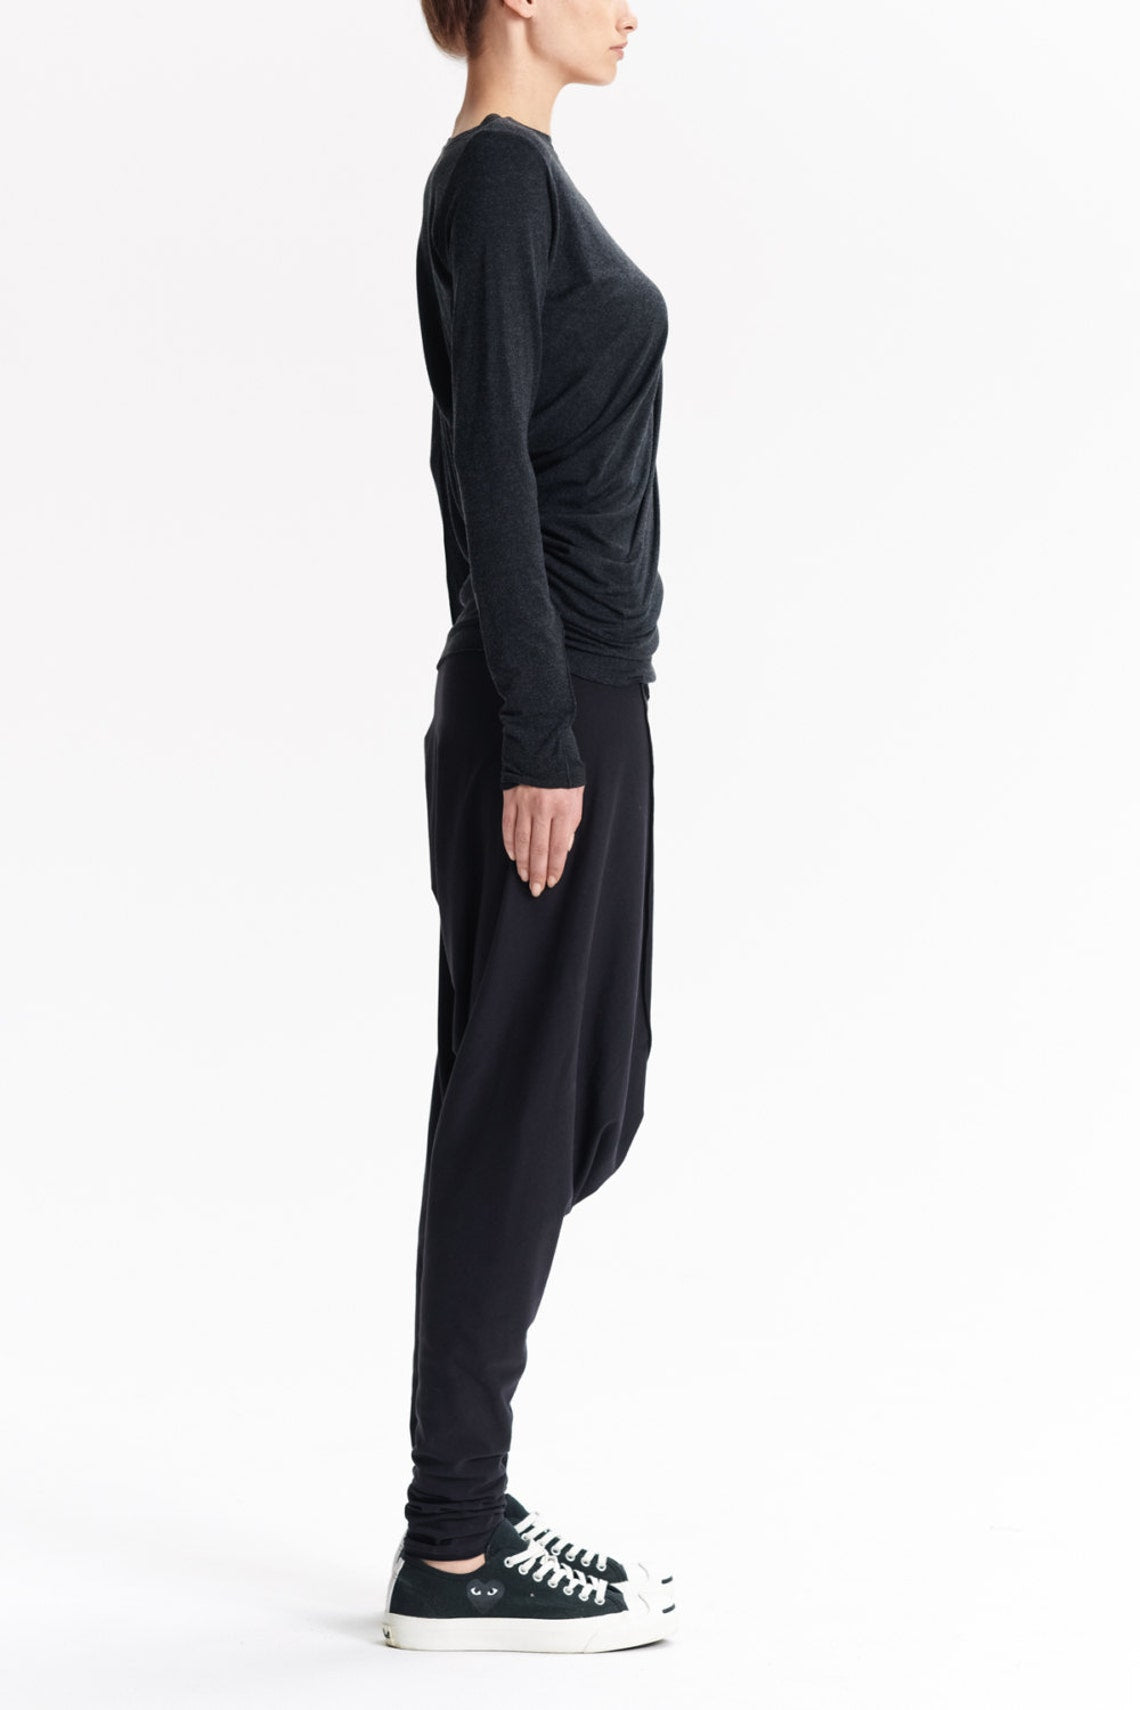 CHARCOAL DRAPED BOATNECK TOP